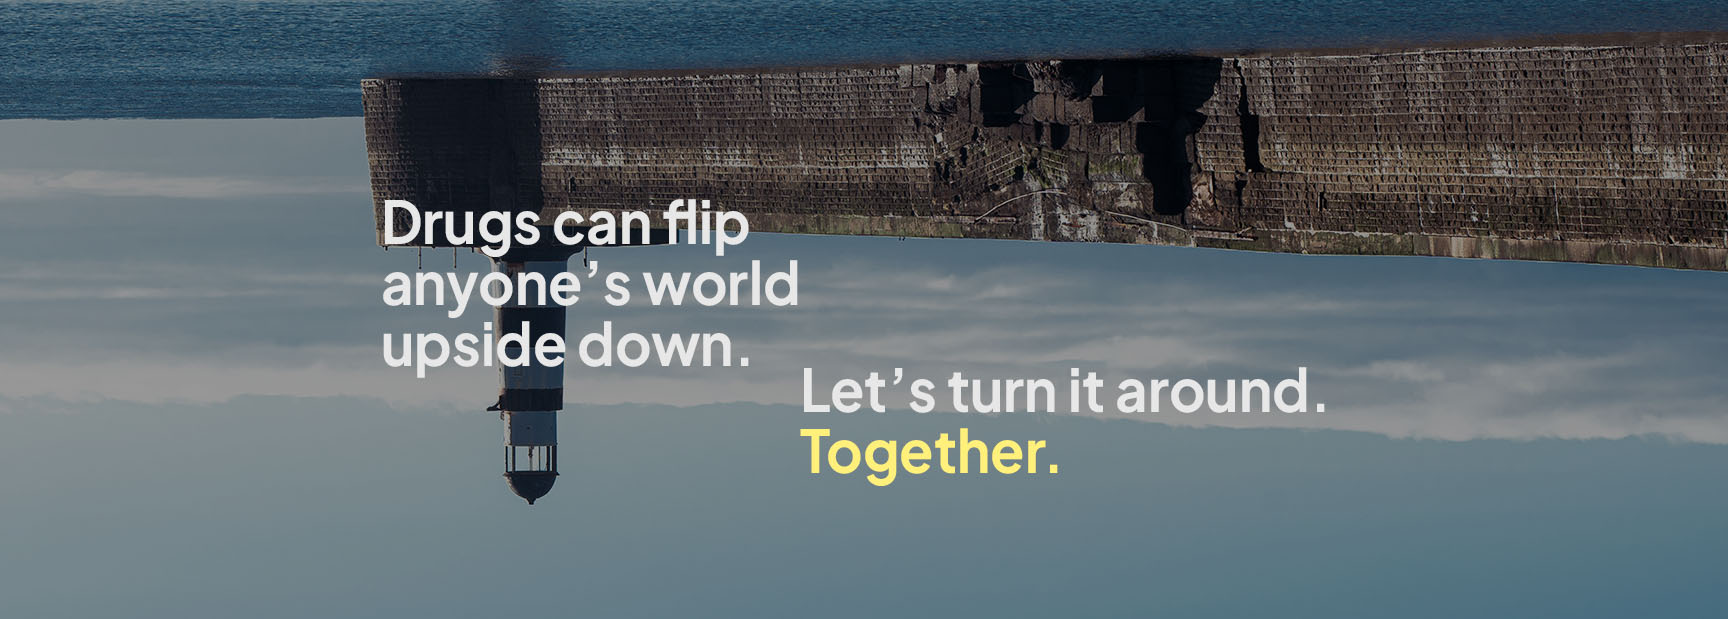 An image of a pier and a lighthouse stretching out to sea is turned upside down. The text says 'Drugs can flip anyone's world upside down. Let's turn it around together."